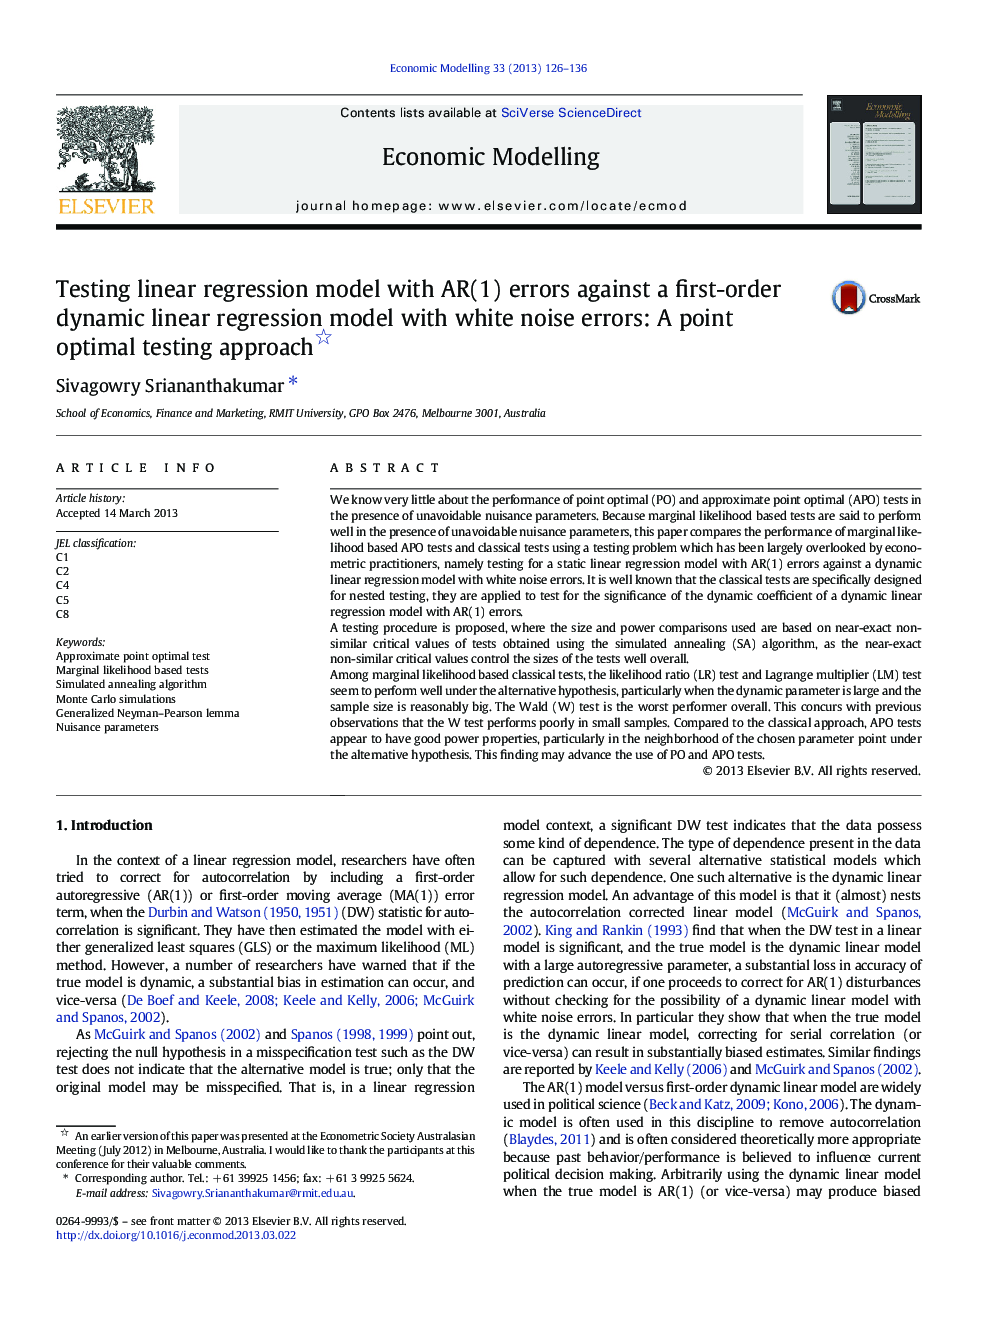 Testing linear regression model with AR(1) errors against a first-order dynamic linear regression model with white noise errors: A point optimal testing approach